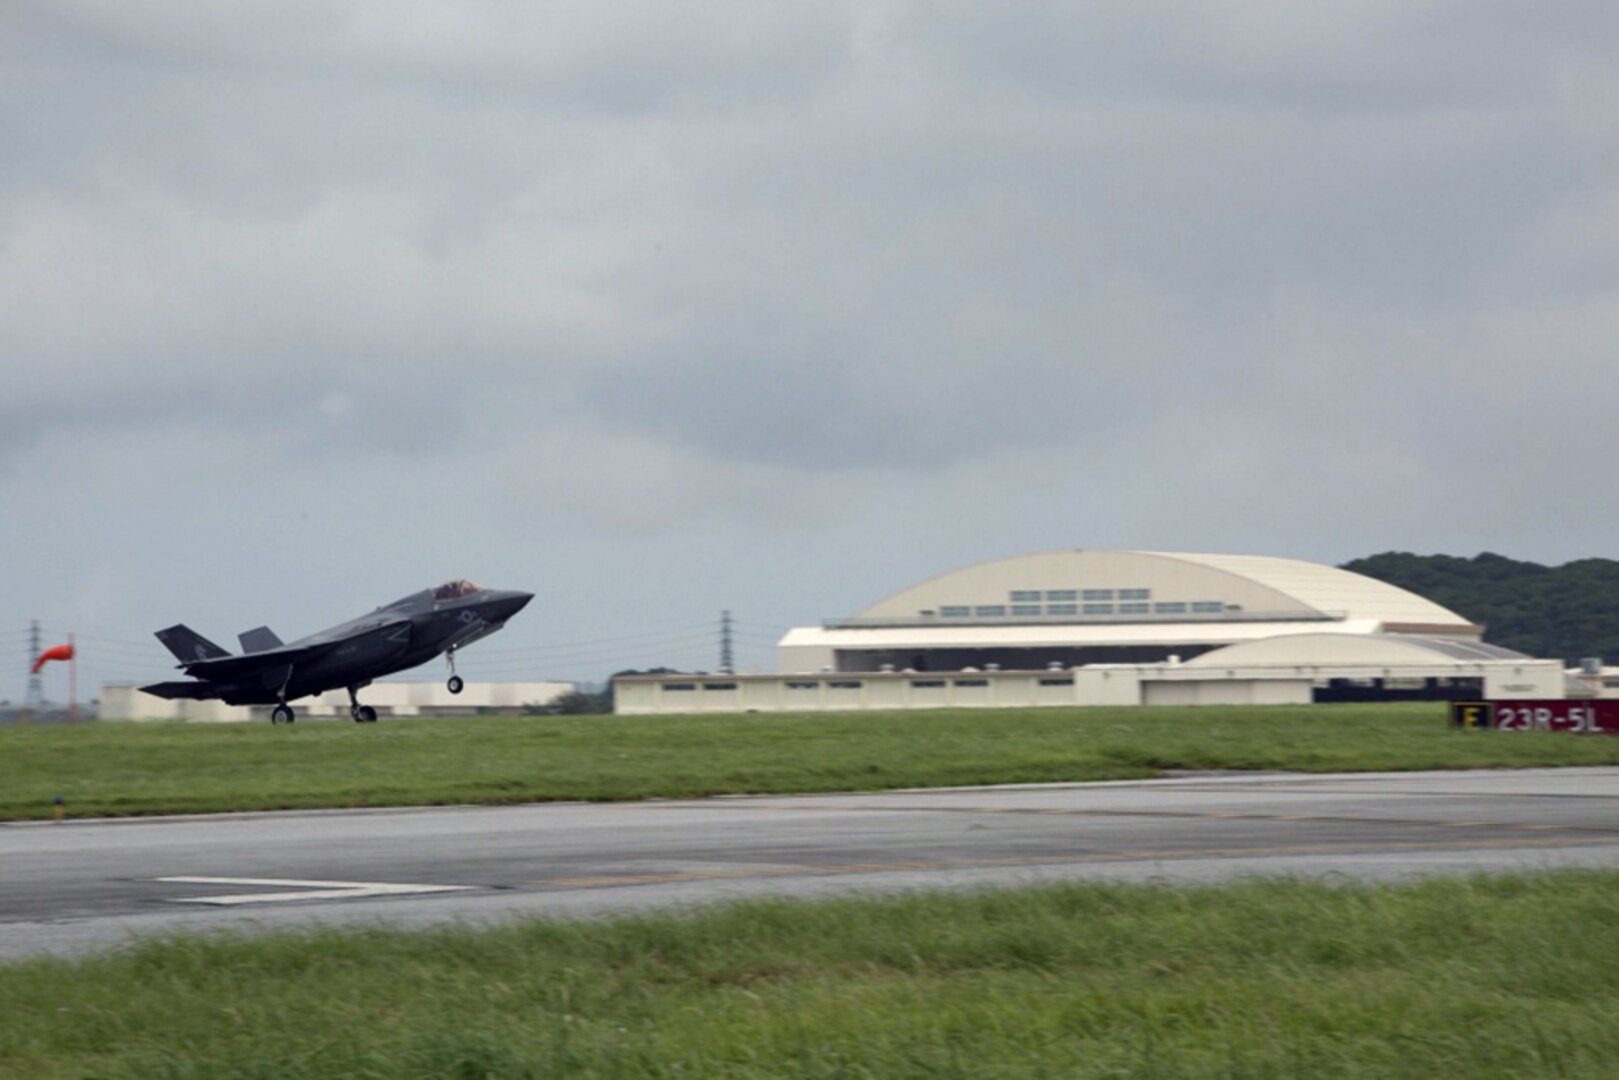 A U.S. Marine Corps F-35B Lightning II aircraft with Marine Fighter Attack Squadron 121, Marine Aircraft Group 12, 1st Marine Aircraft Wing, conducted a training flight from Marine Corps Air Station Iwakuni to Kadena Air Force Base, Okinawa, June 26, 2017.  The Marines with VMFA- 121 worked alongside Airmen with the 18th Wing. This event marked the first time an F-35B Lightning II landed in Okinawa. 